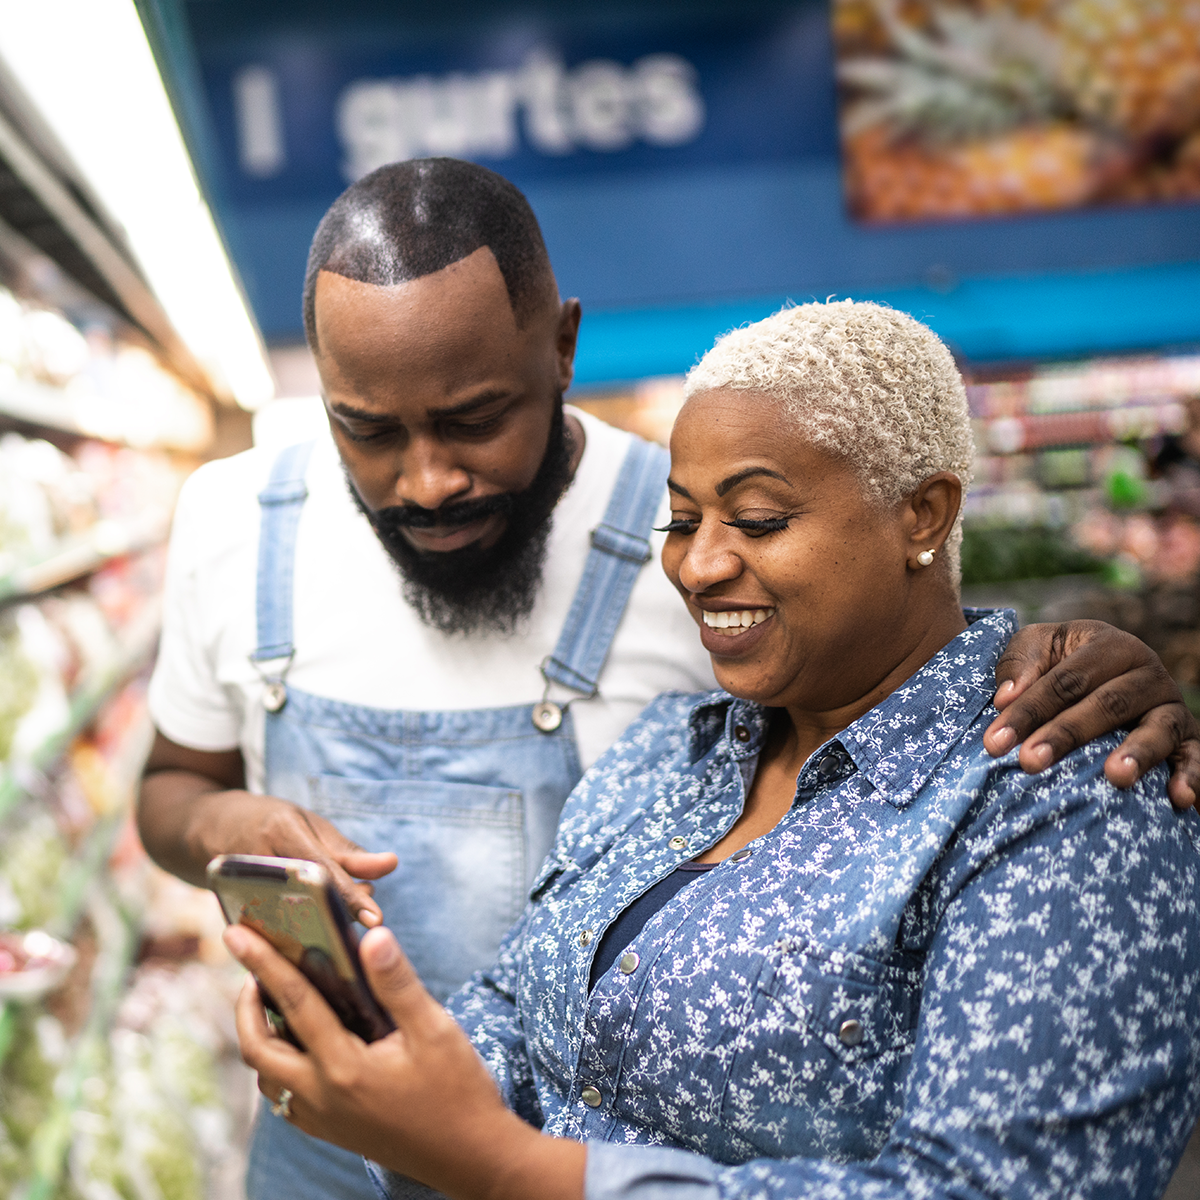 An African American man and woman in a grocery store smile while looking at a smartphone.